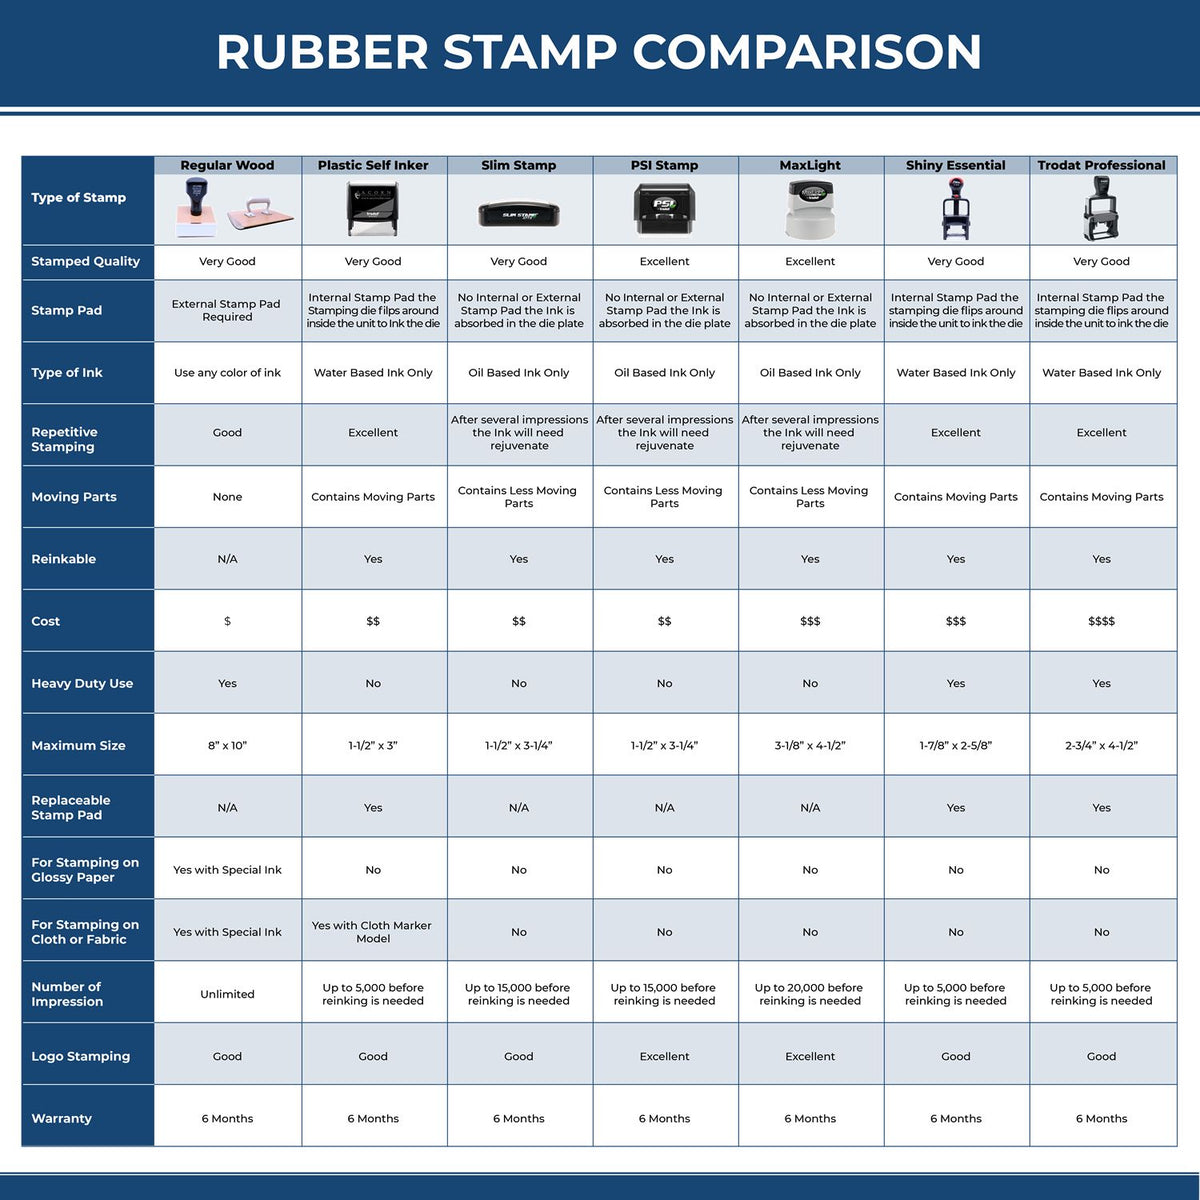 A comparison chart for the different types of mount models available for the Wooden Handle Pennsylvania Rectangular Notary Public Stamp.